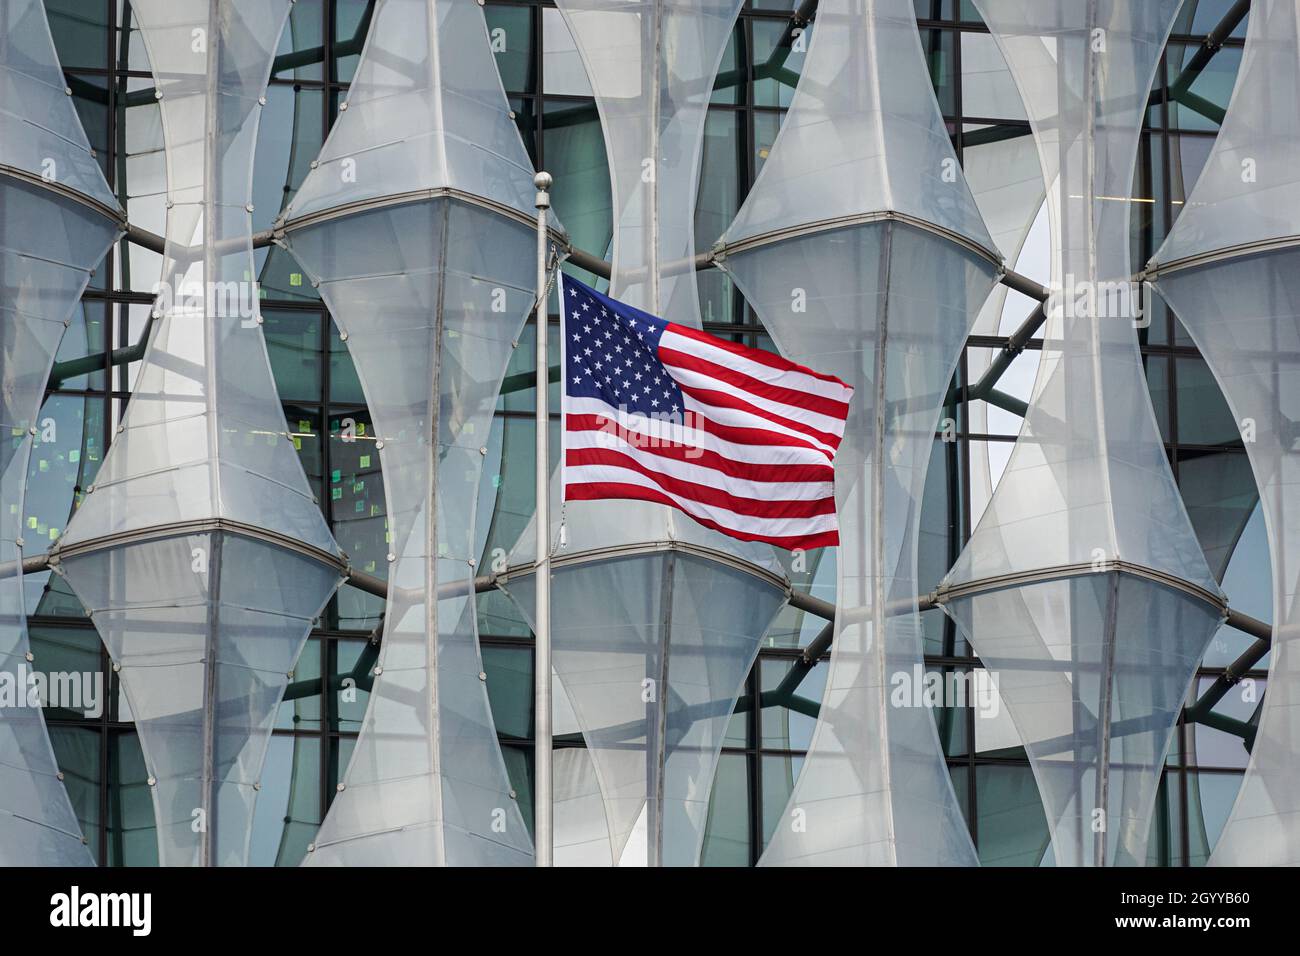 American flag at the Embassy of the United States of America in Nine Elms, London England United Kingdom UK Stock Photo